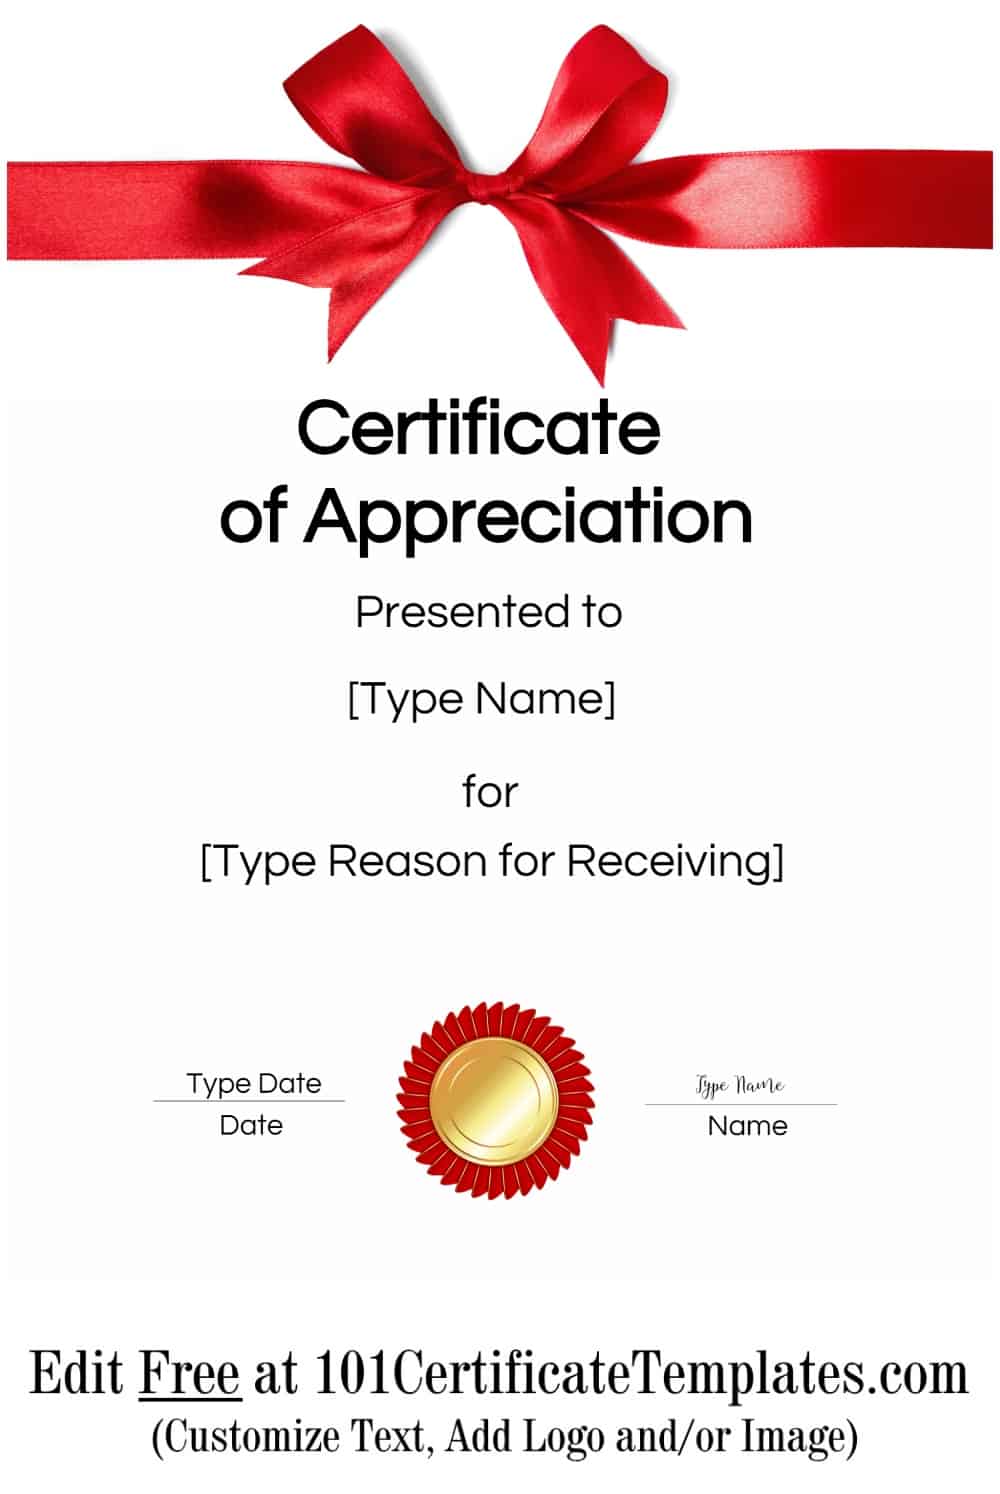 FREE Printable Certificate of Appreciation Template Customize Online